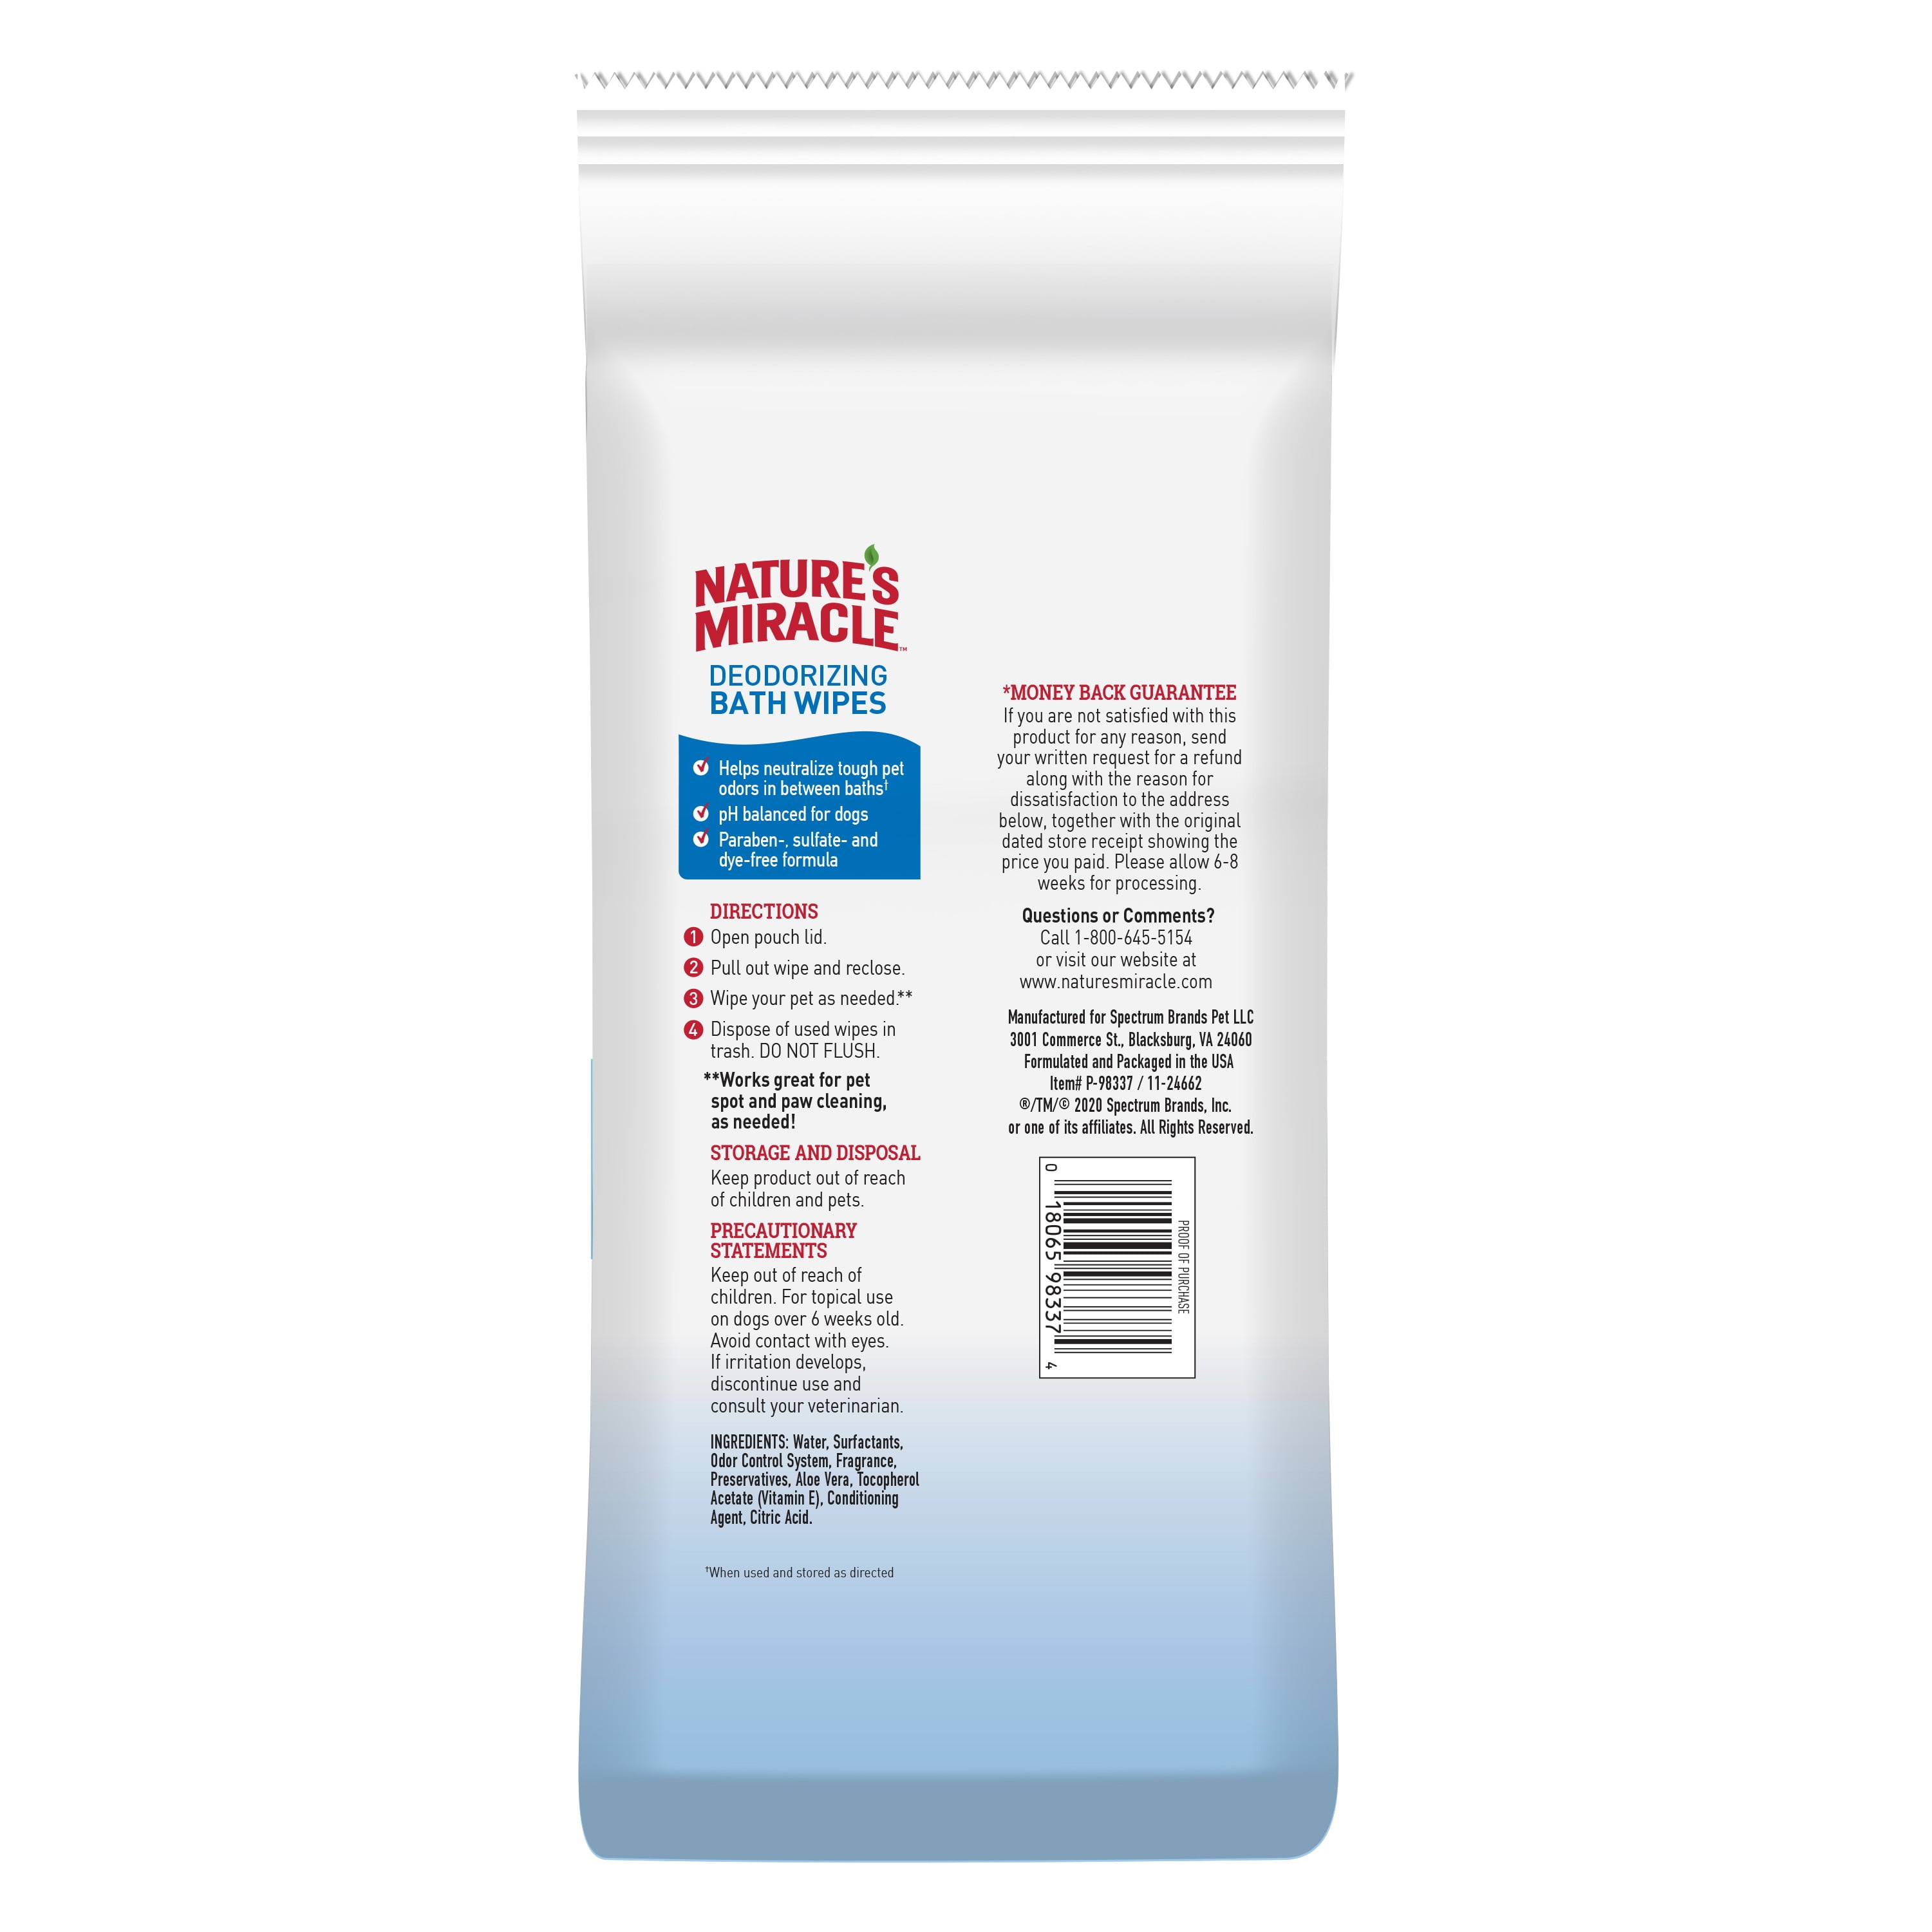 Natures Miracle Deodorizing Bath Wipes for Dogs Clean Breeze Scent